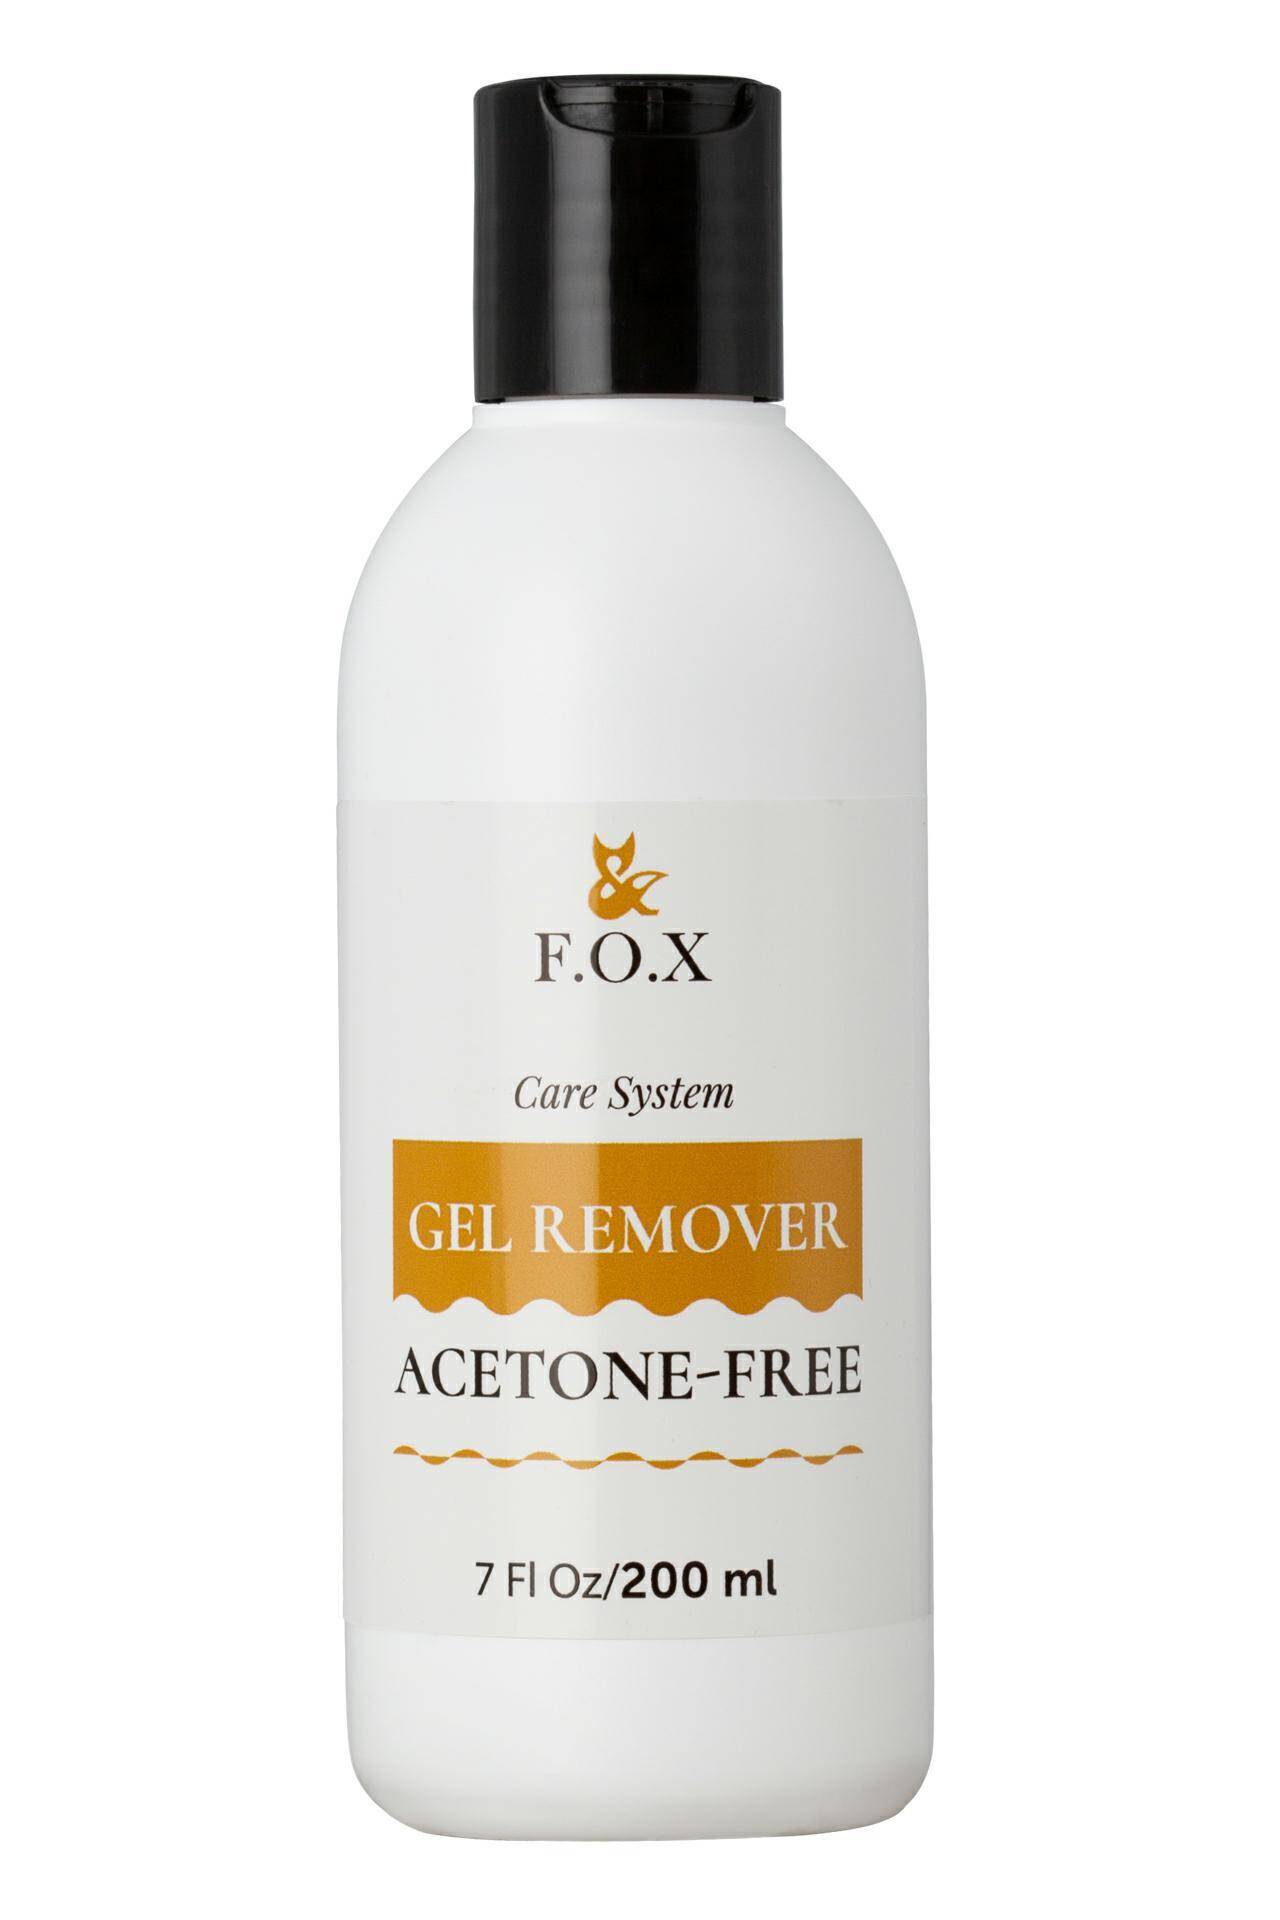 FOX Care system Gel Remover ACETONE-FREE 200 ml